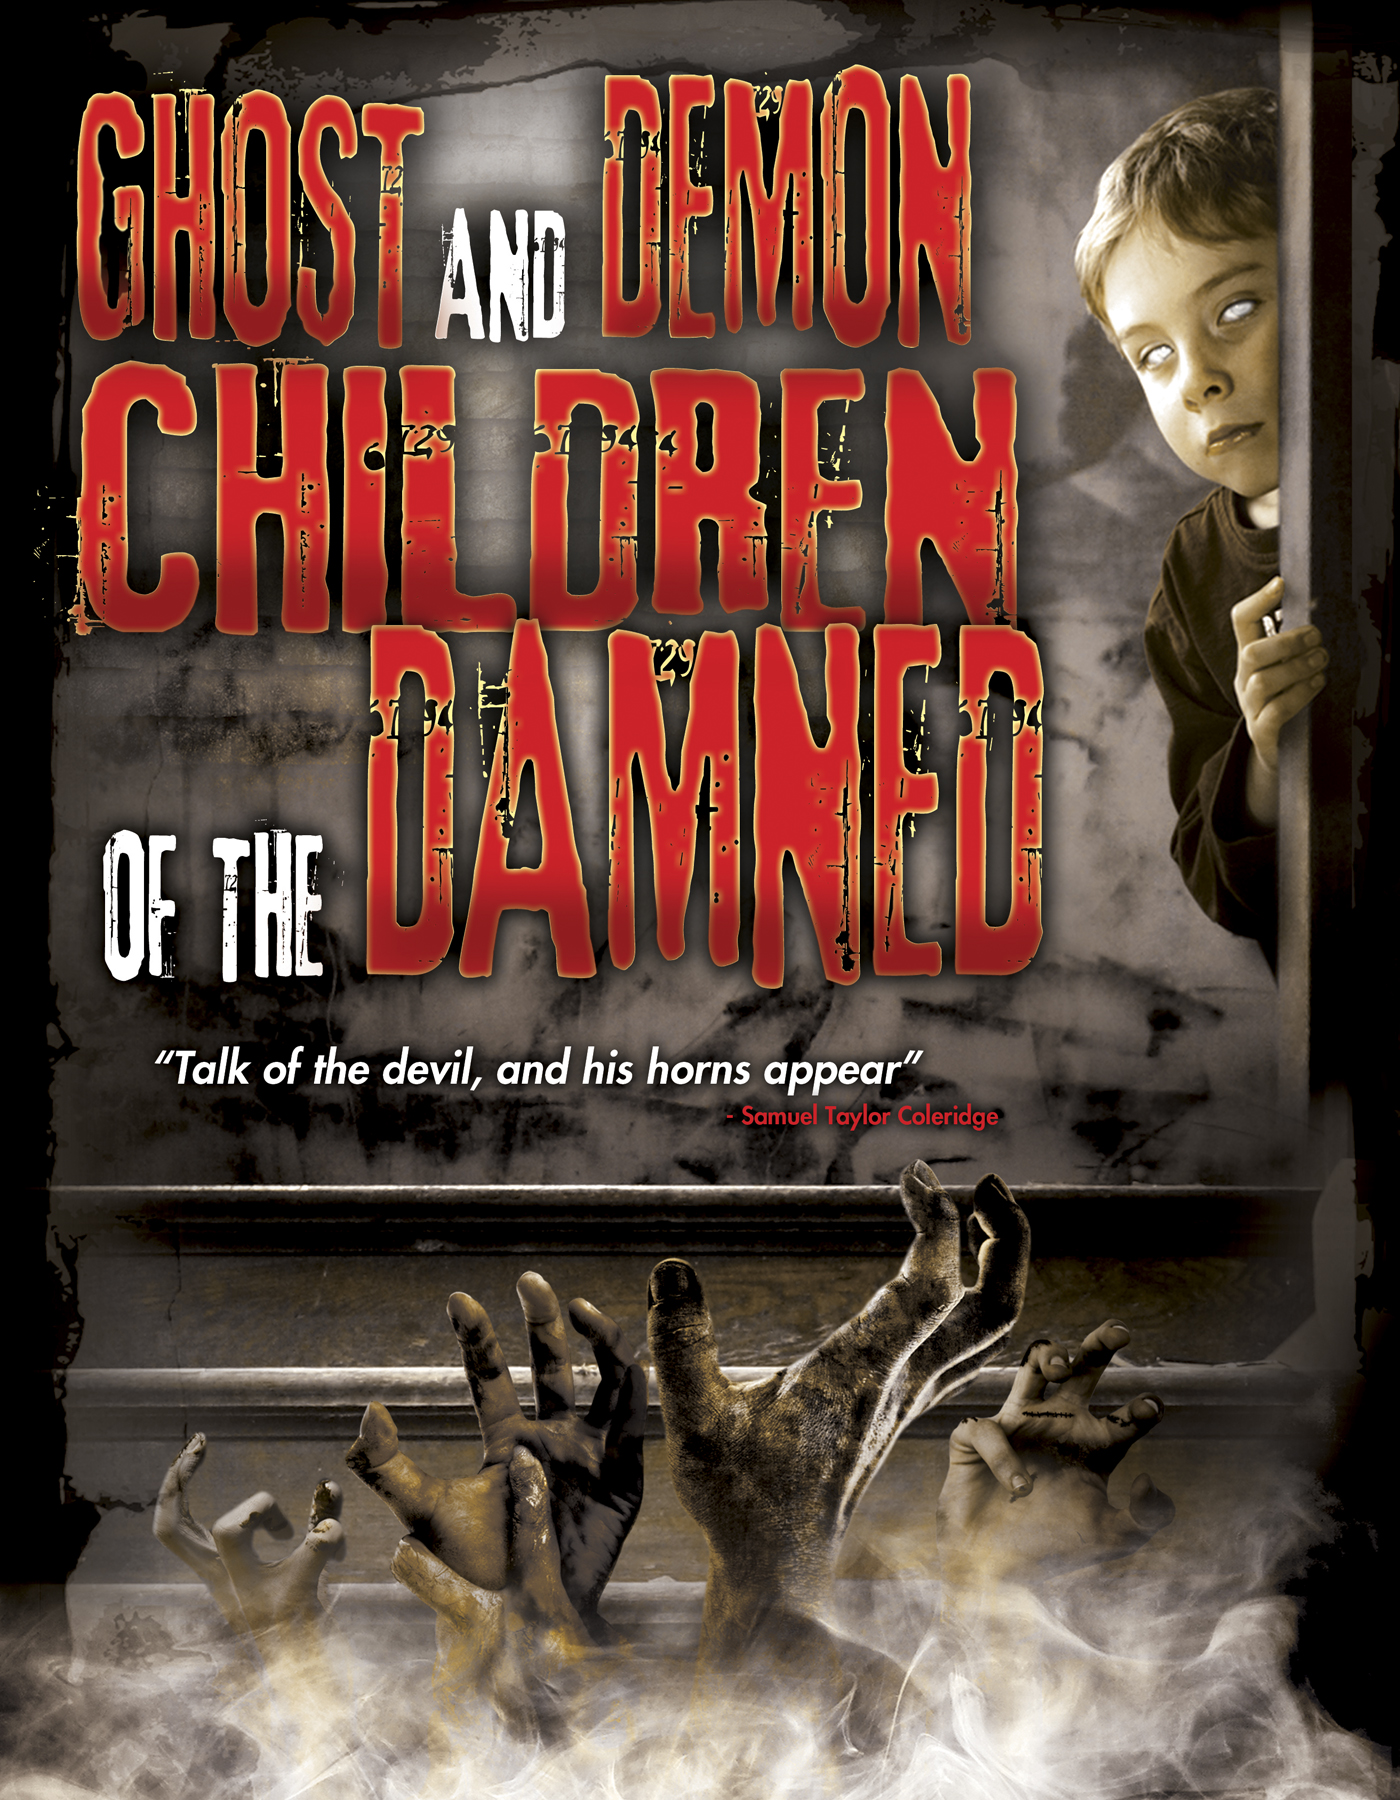 William Burke, O.H. Krill, Paul Hughes and Bill Kraft in Ghost and Demon Children of the Damned (2014)